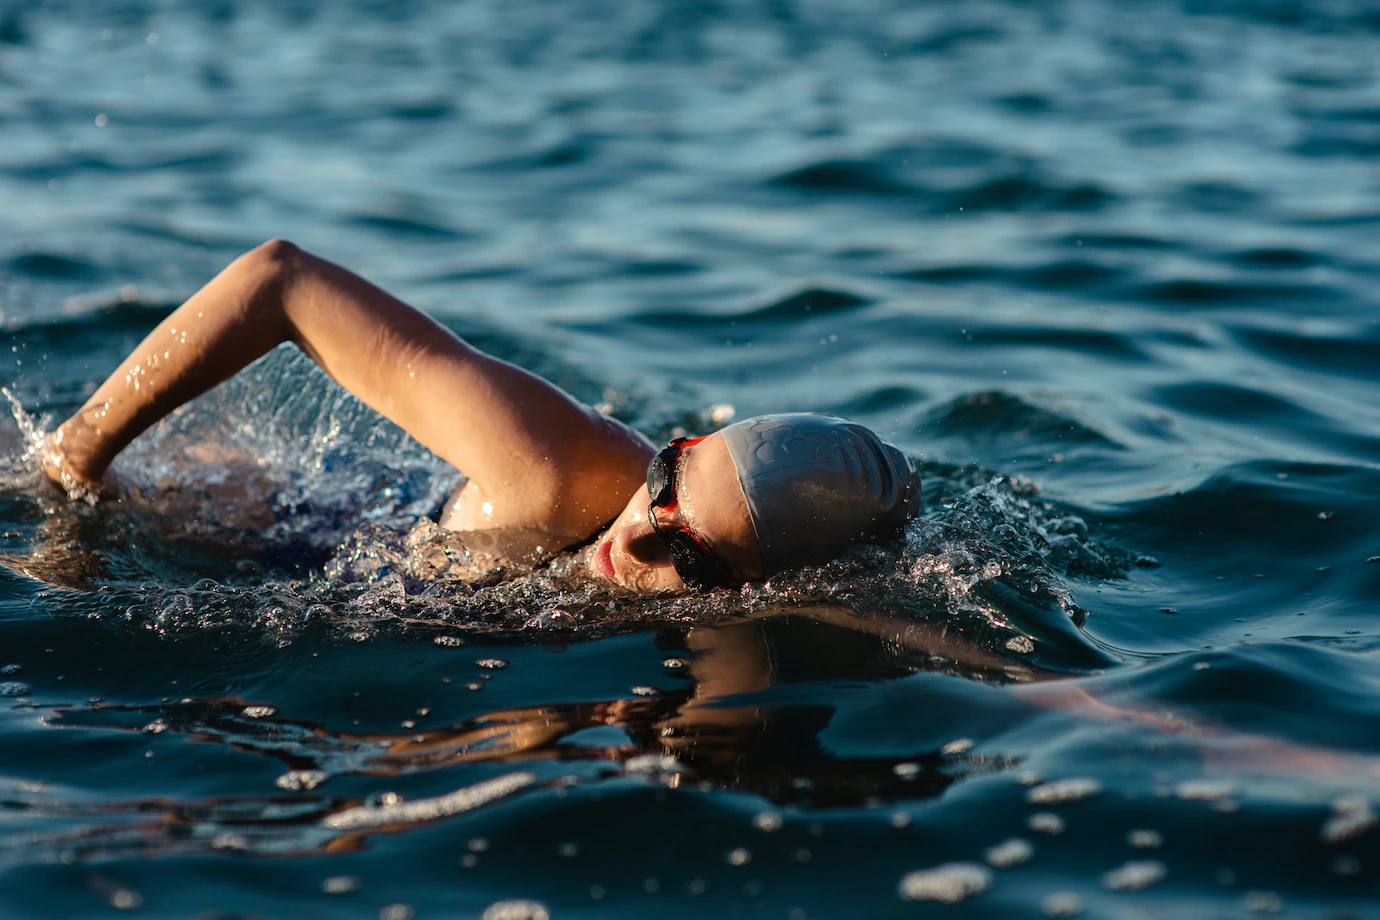 Can You Bet on Swimming? How to Make Money Betting on This Sport